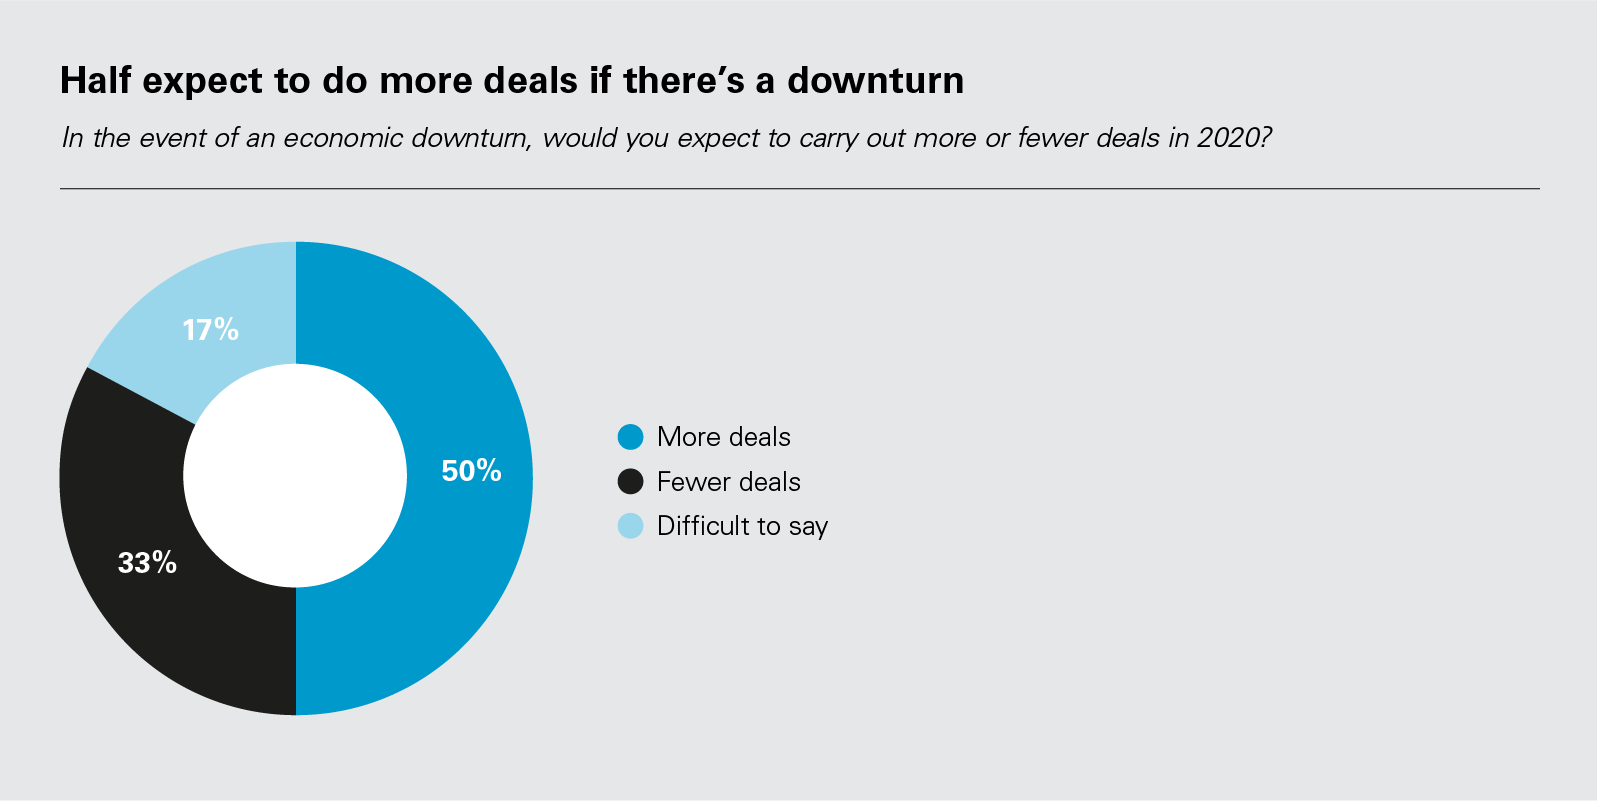 Half expect to do more deals if there’s a downturn